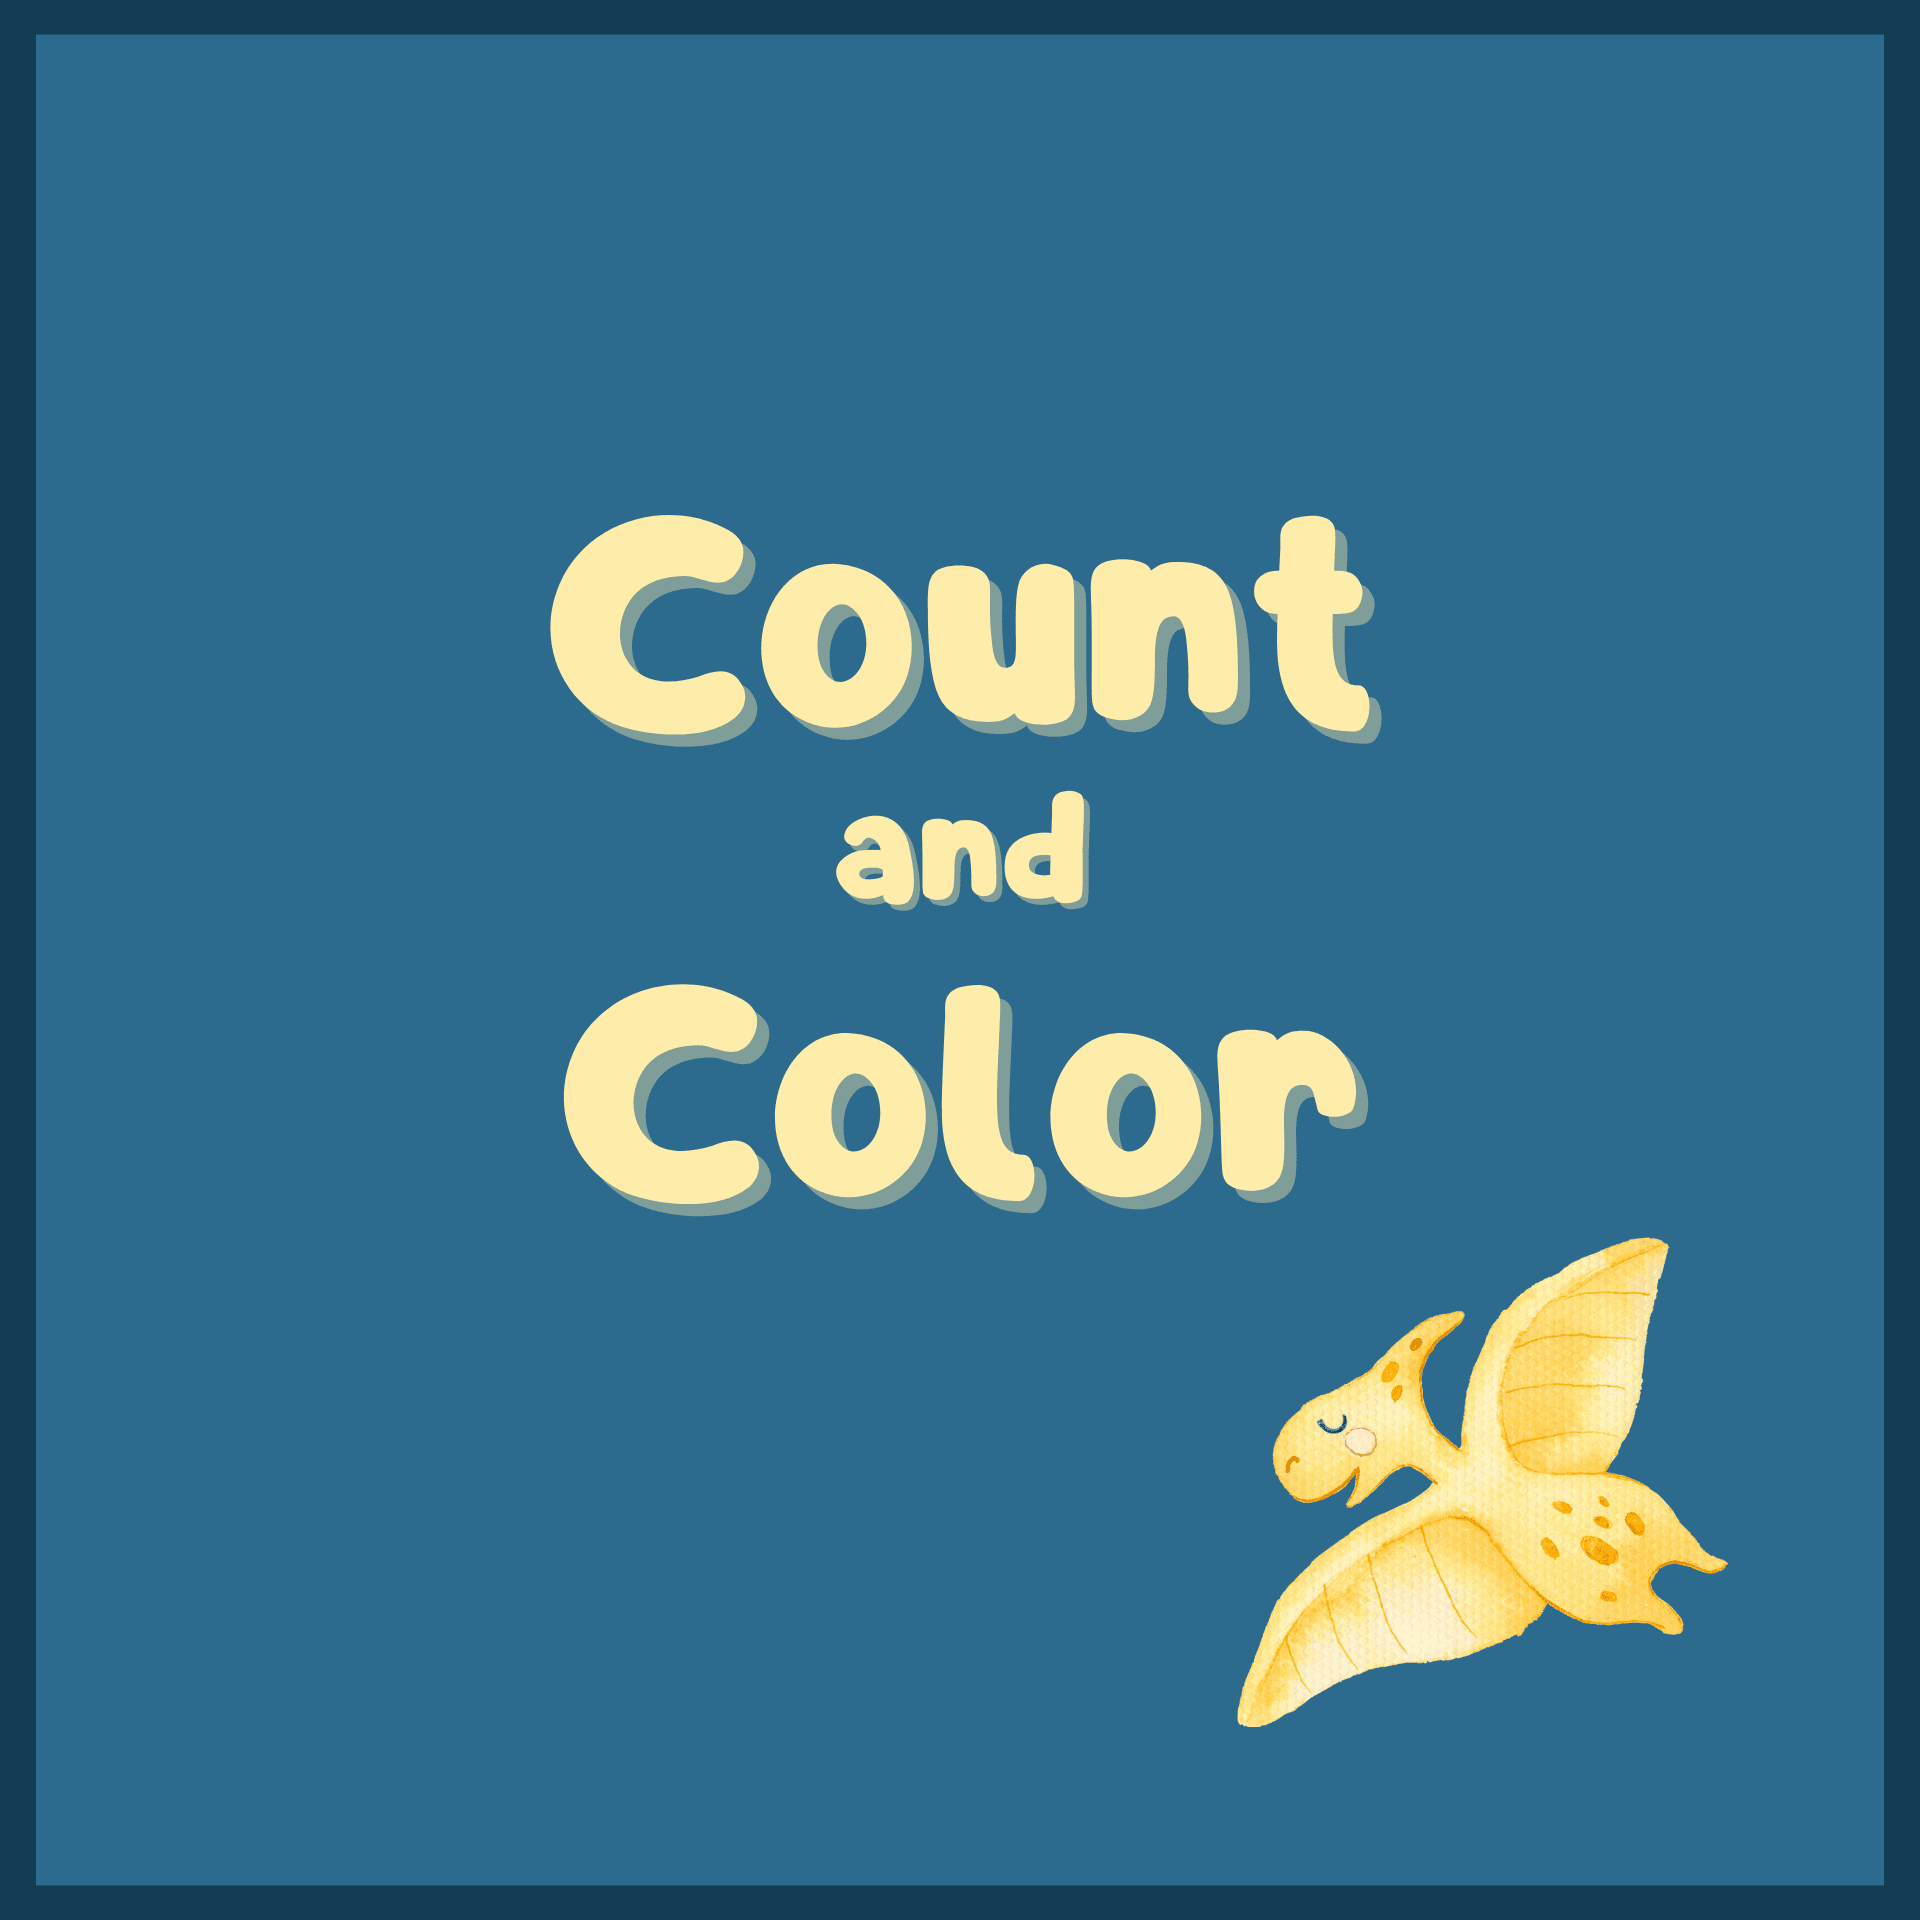 Count and Color Kindergarten Worksheets for Students | Free Printable